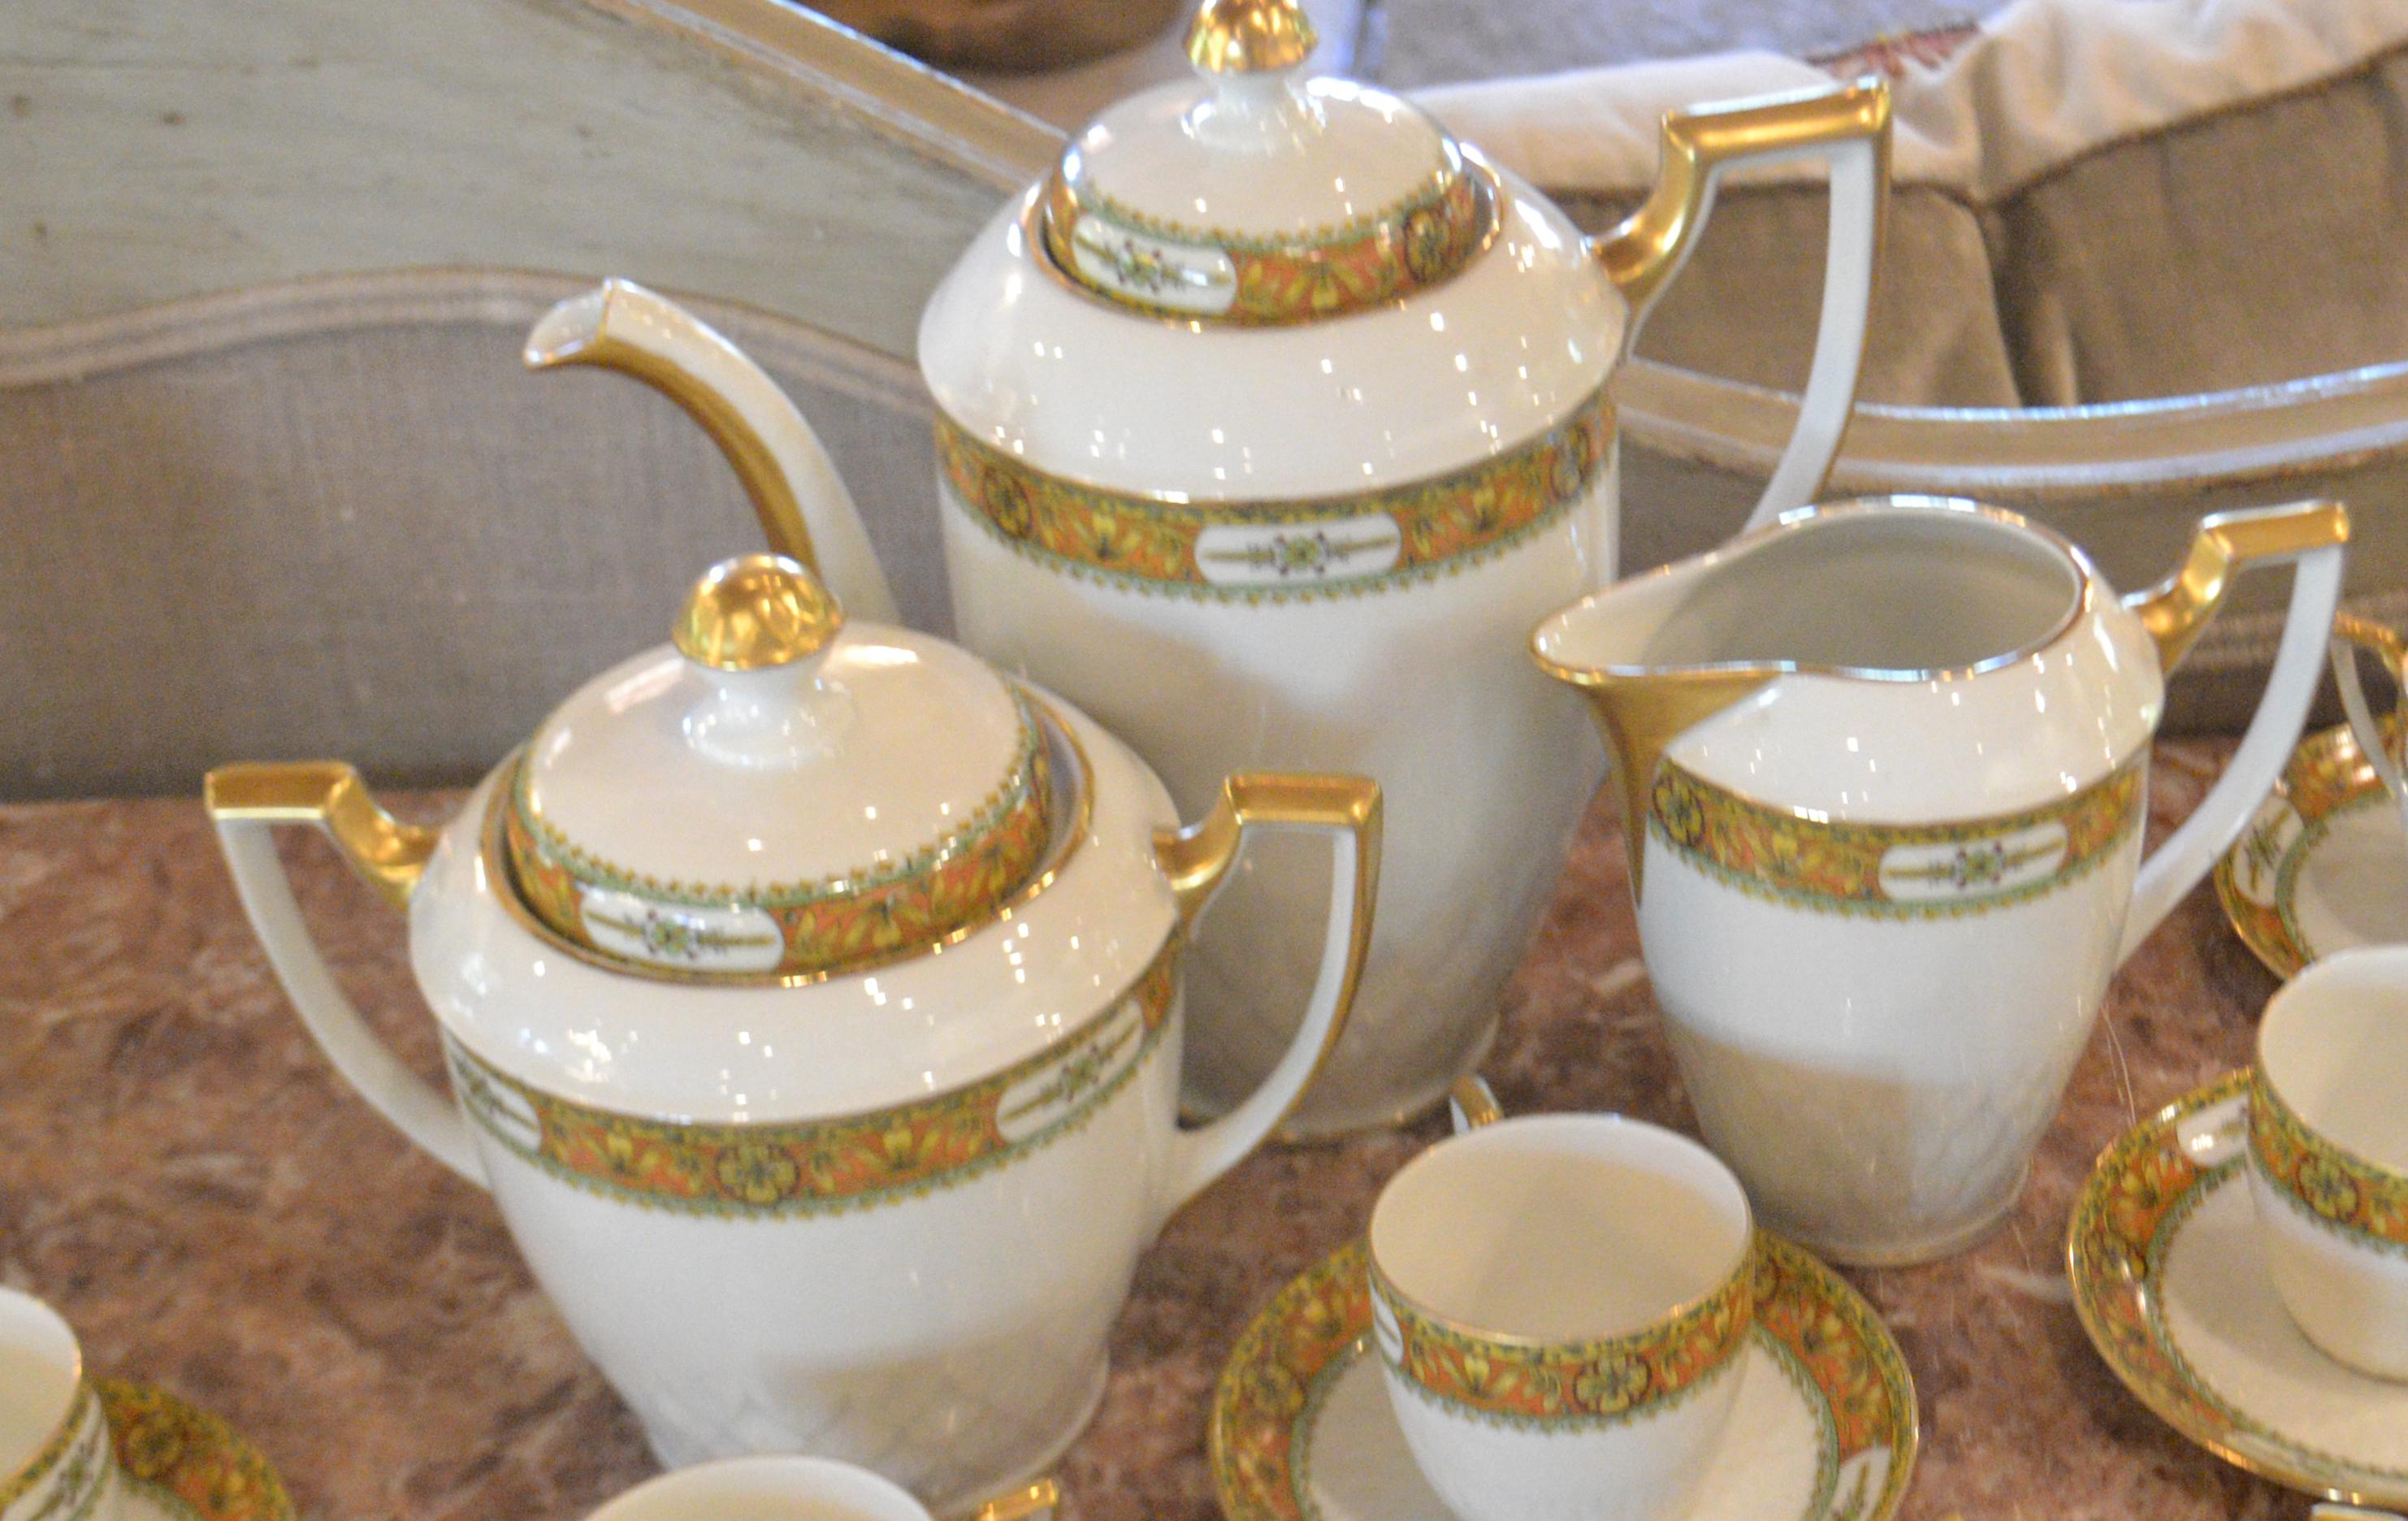 Limoges tea set, service for 6, plus 1. Gold Farmhouse collection, France, perfect condition, 7 cups and saucers, coffee/tea pot, creamer and sugar.